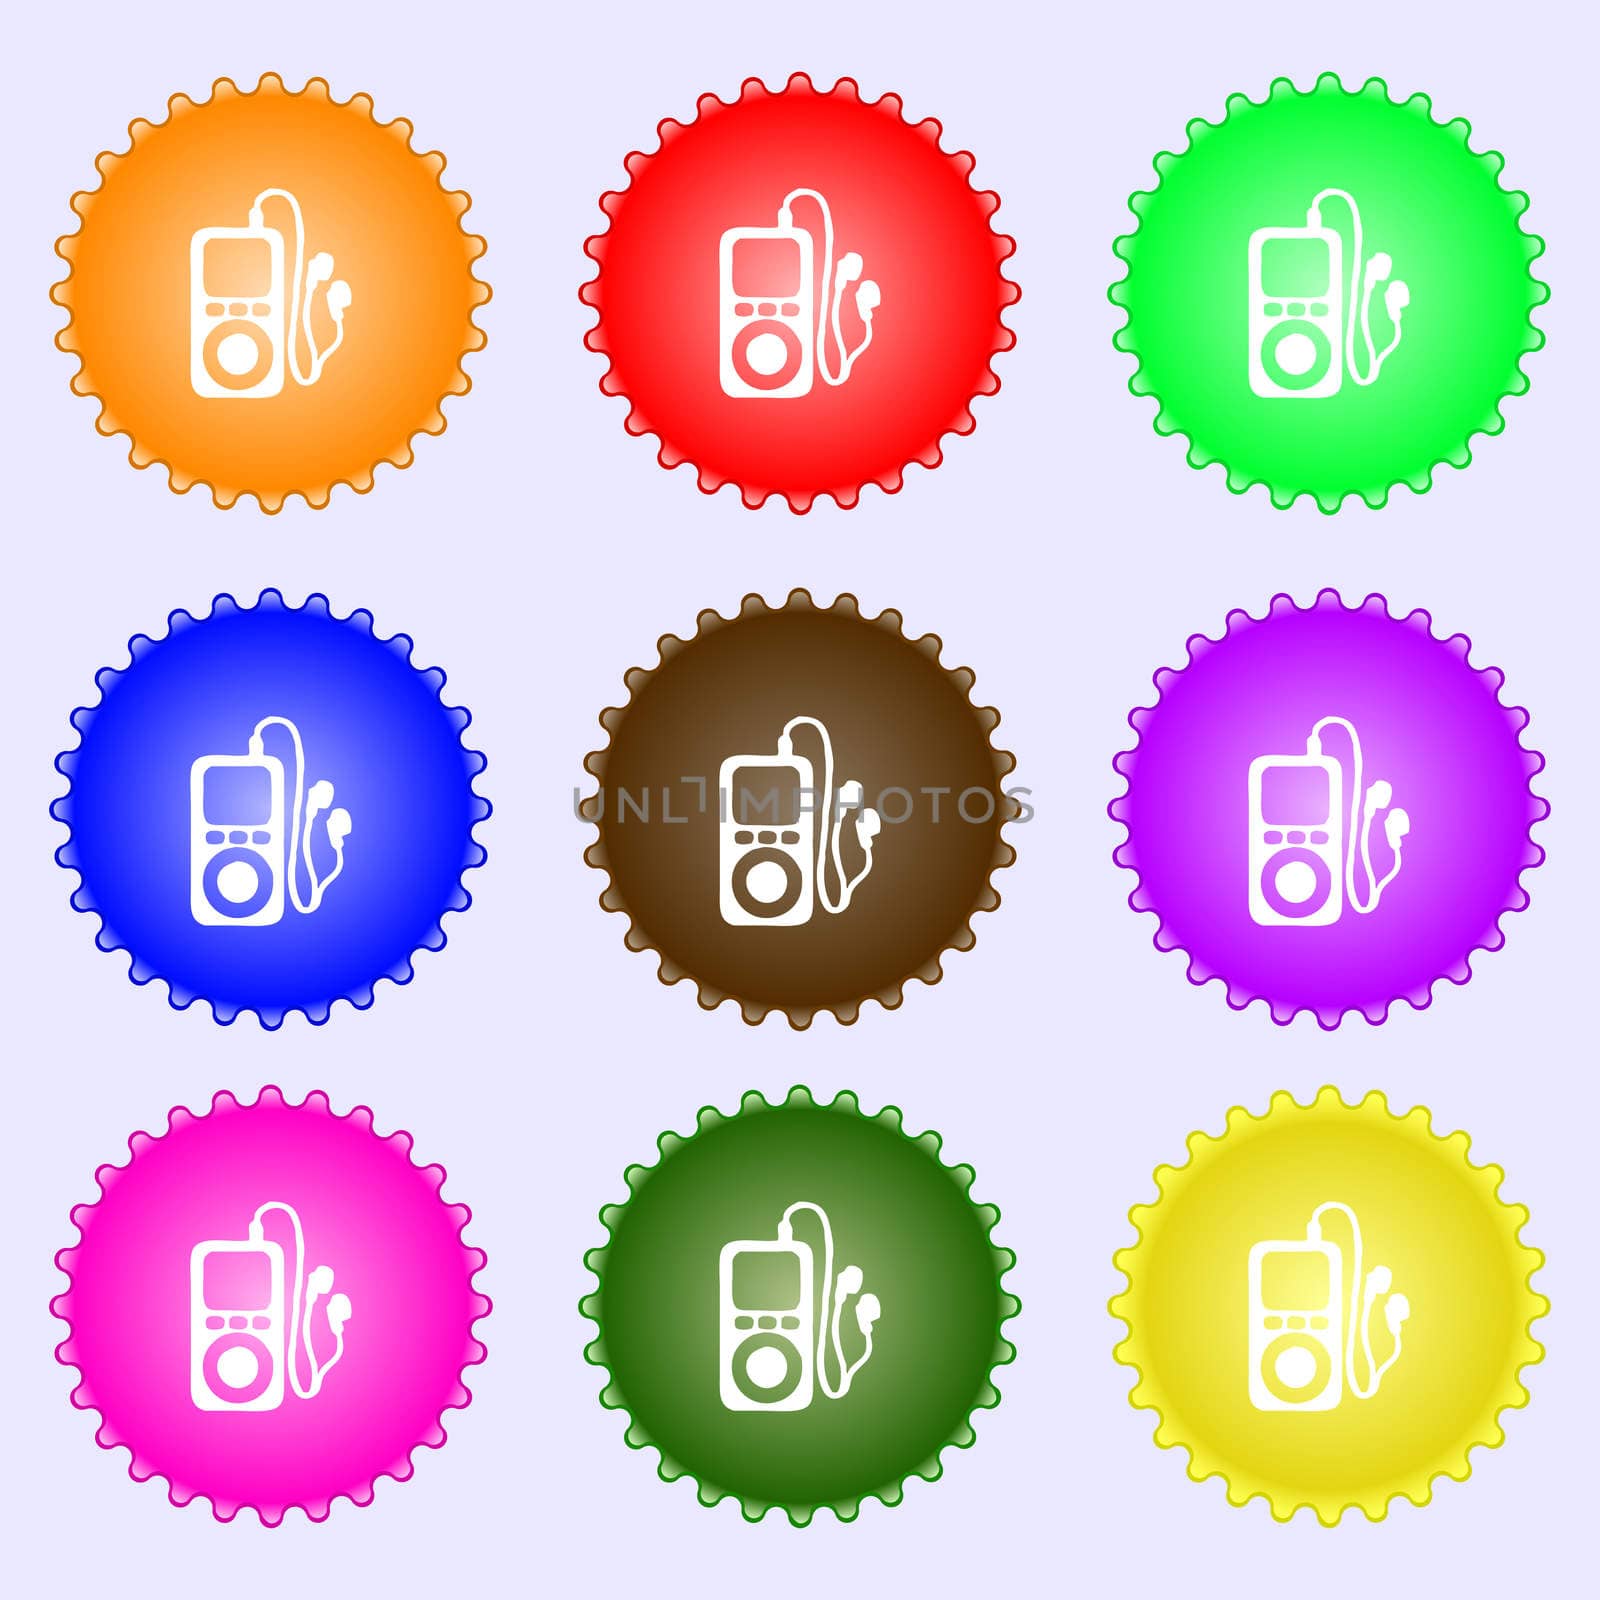 MP3 player, headphones, music icon sign. A set of nine different colored labels. illustration